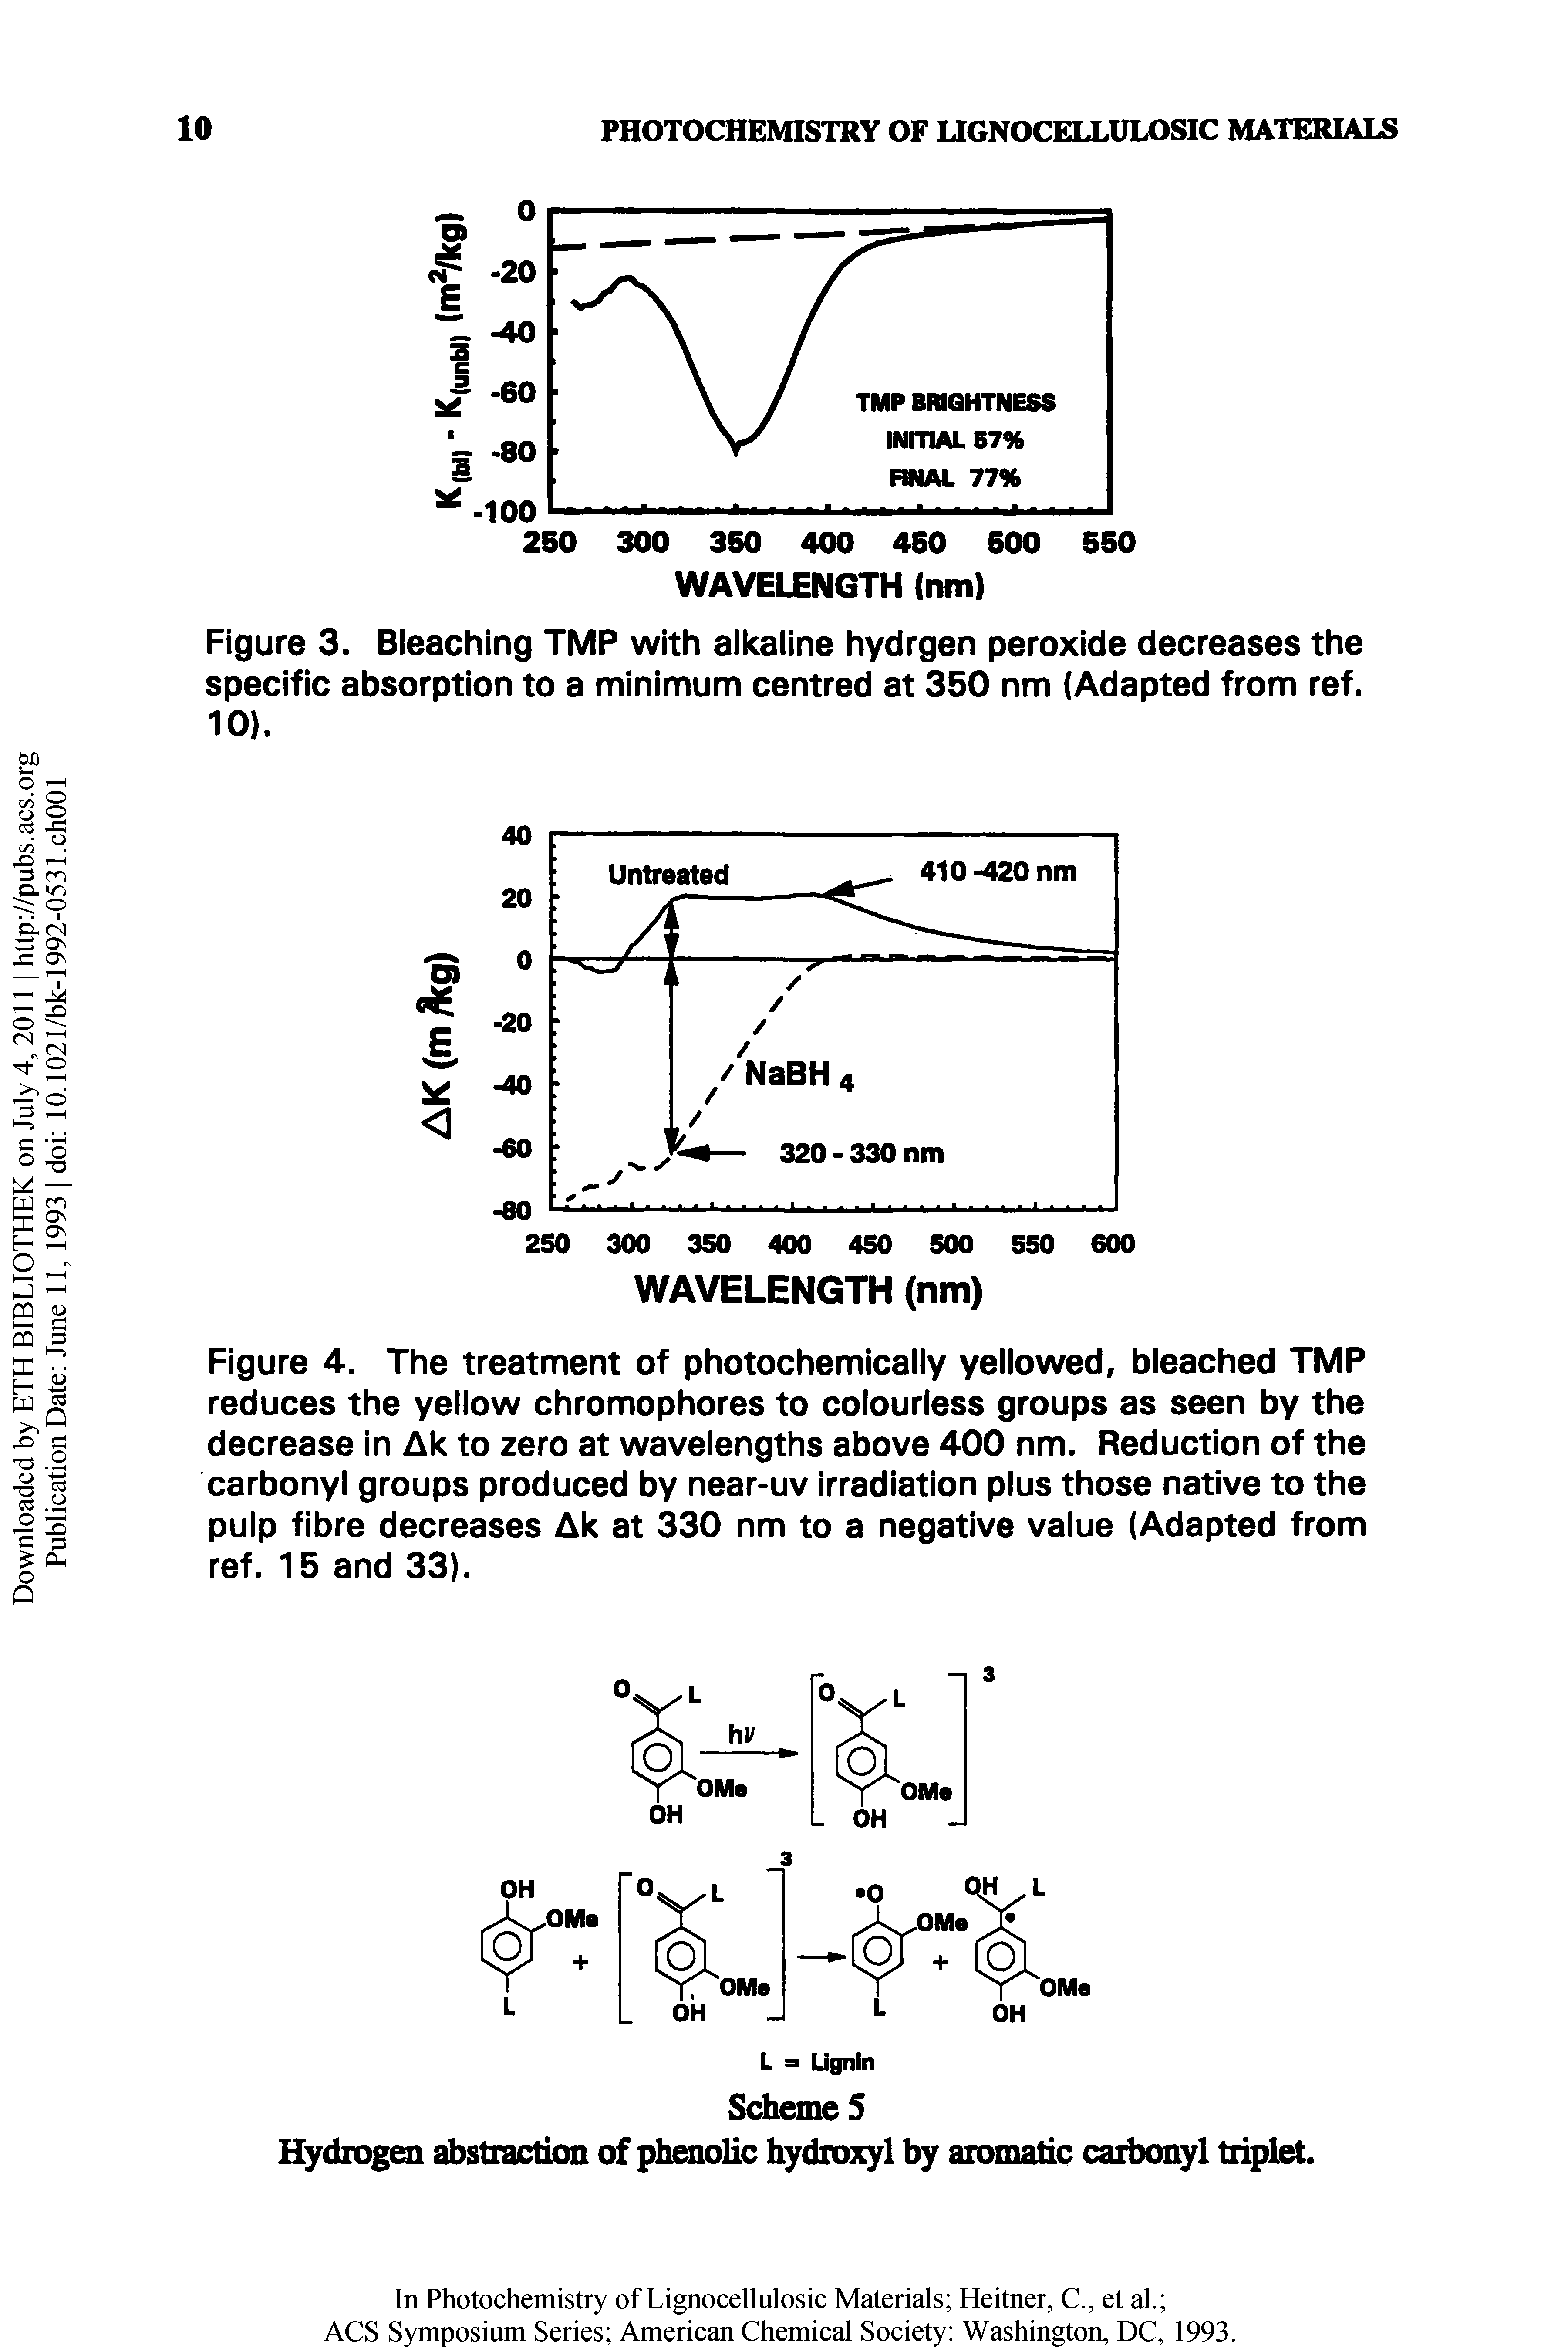 Figure 4. The treatment of photochemically yellowed, bleached TMP reduces the yellow chromophores to colourless groups as seen by the decrease in Ak to zero at wavelengths above 400 nm. Reduction of the carbonyl groups produced by near-uv irradiation plus those native to the pulp fibre decreases Ak at 330 nm to a negative value (Adapted from ref. 15 and 33).